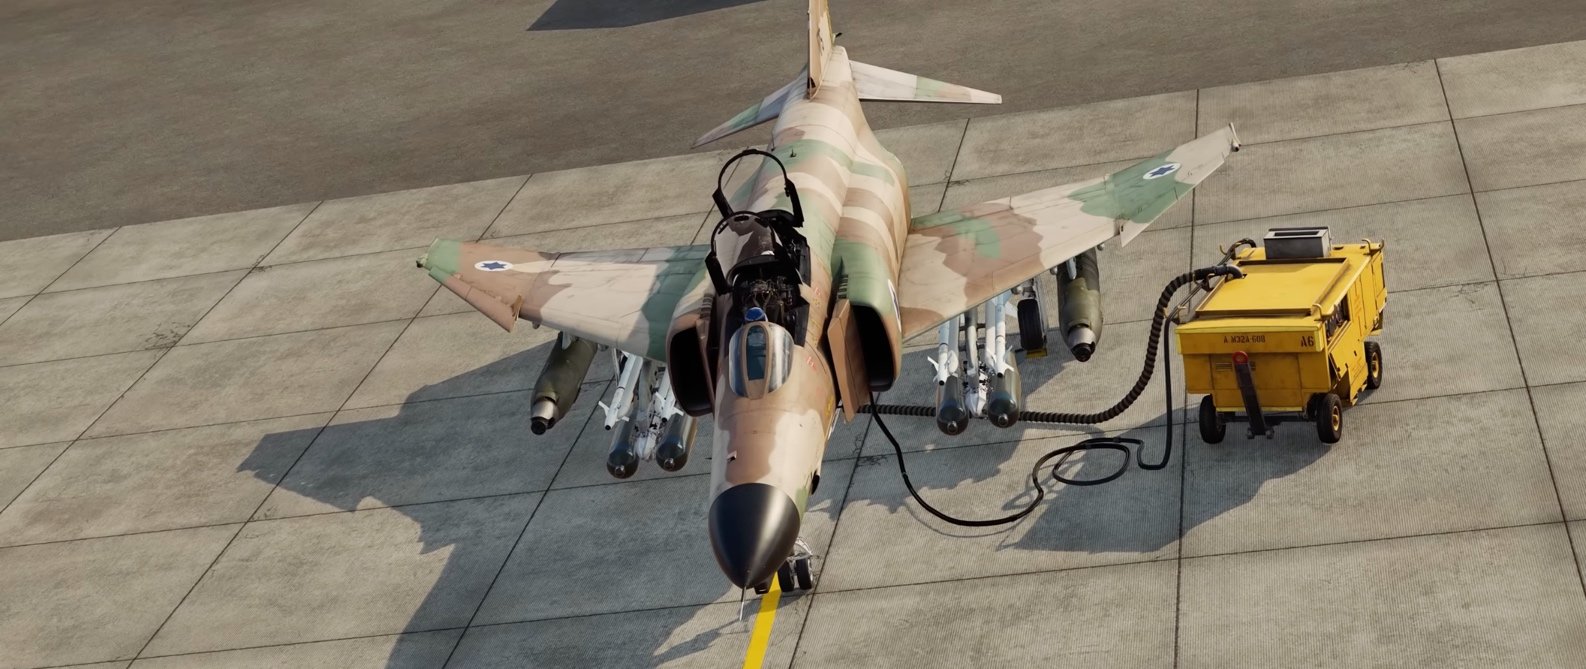 In DCS F-4E Phantom, you will be able to see exactly what's connected to the plane at any given moment – just like in reality. - Experts in Realism, Household Name Synonymous With Quality - Conversation With Heatblur Team - dokument - 2024-03-11